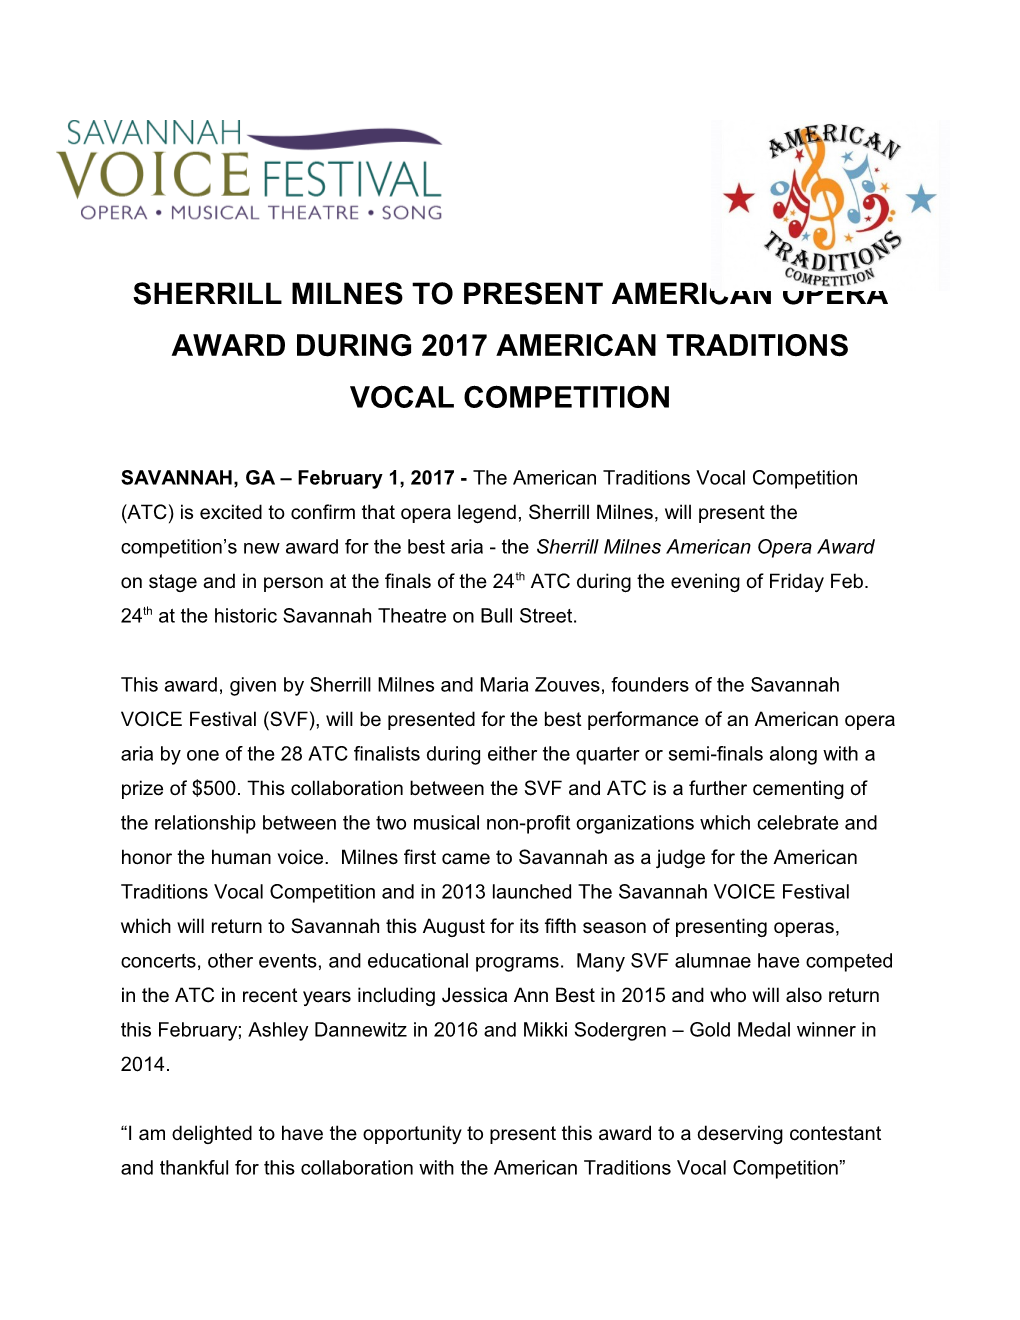 Sherrill Milnes to Present American Opera Award During 2017 American Traditions Vocal